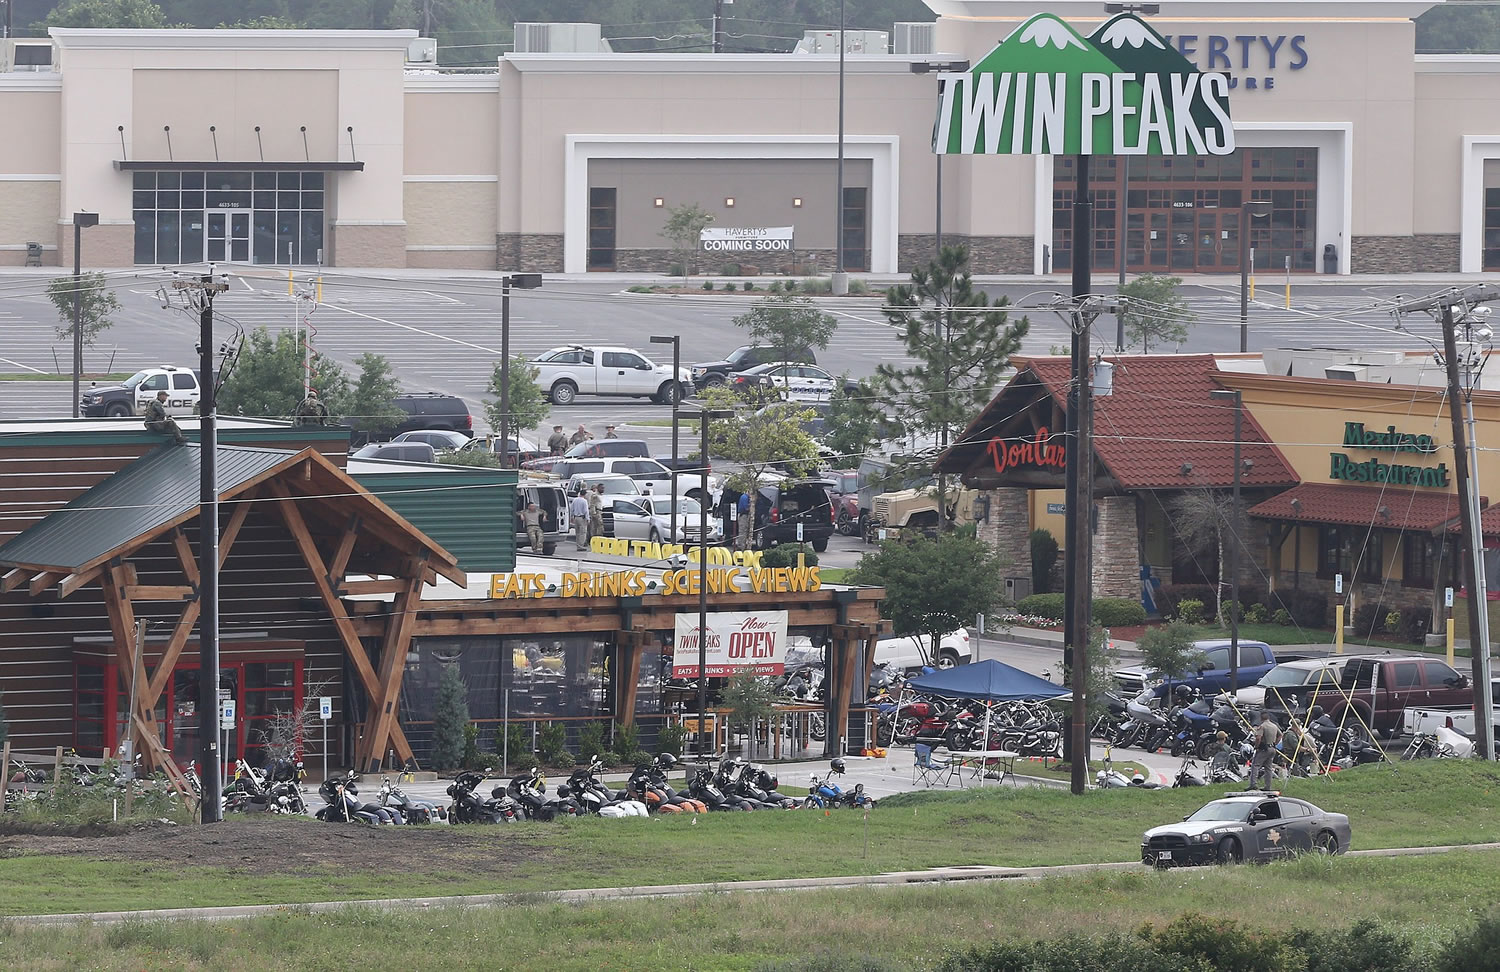 Law enforcement continue to investigate the motorcycle gang related shooting at the Twin Peaks restaurant Monday in Waco, Texas, where 9 were killed Sunday and over a dozen injured.